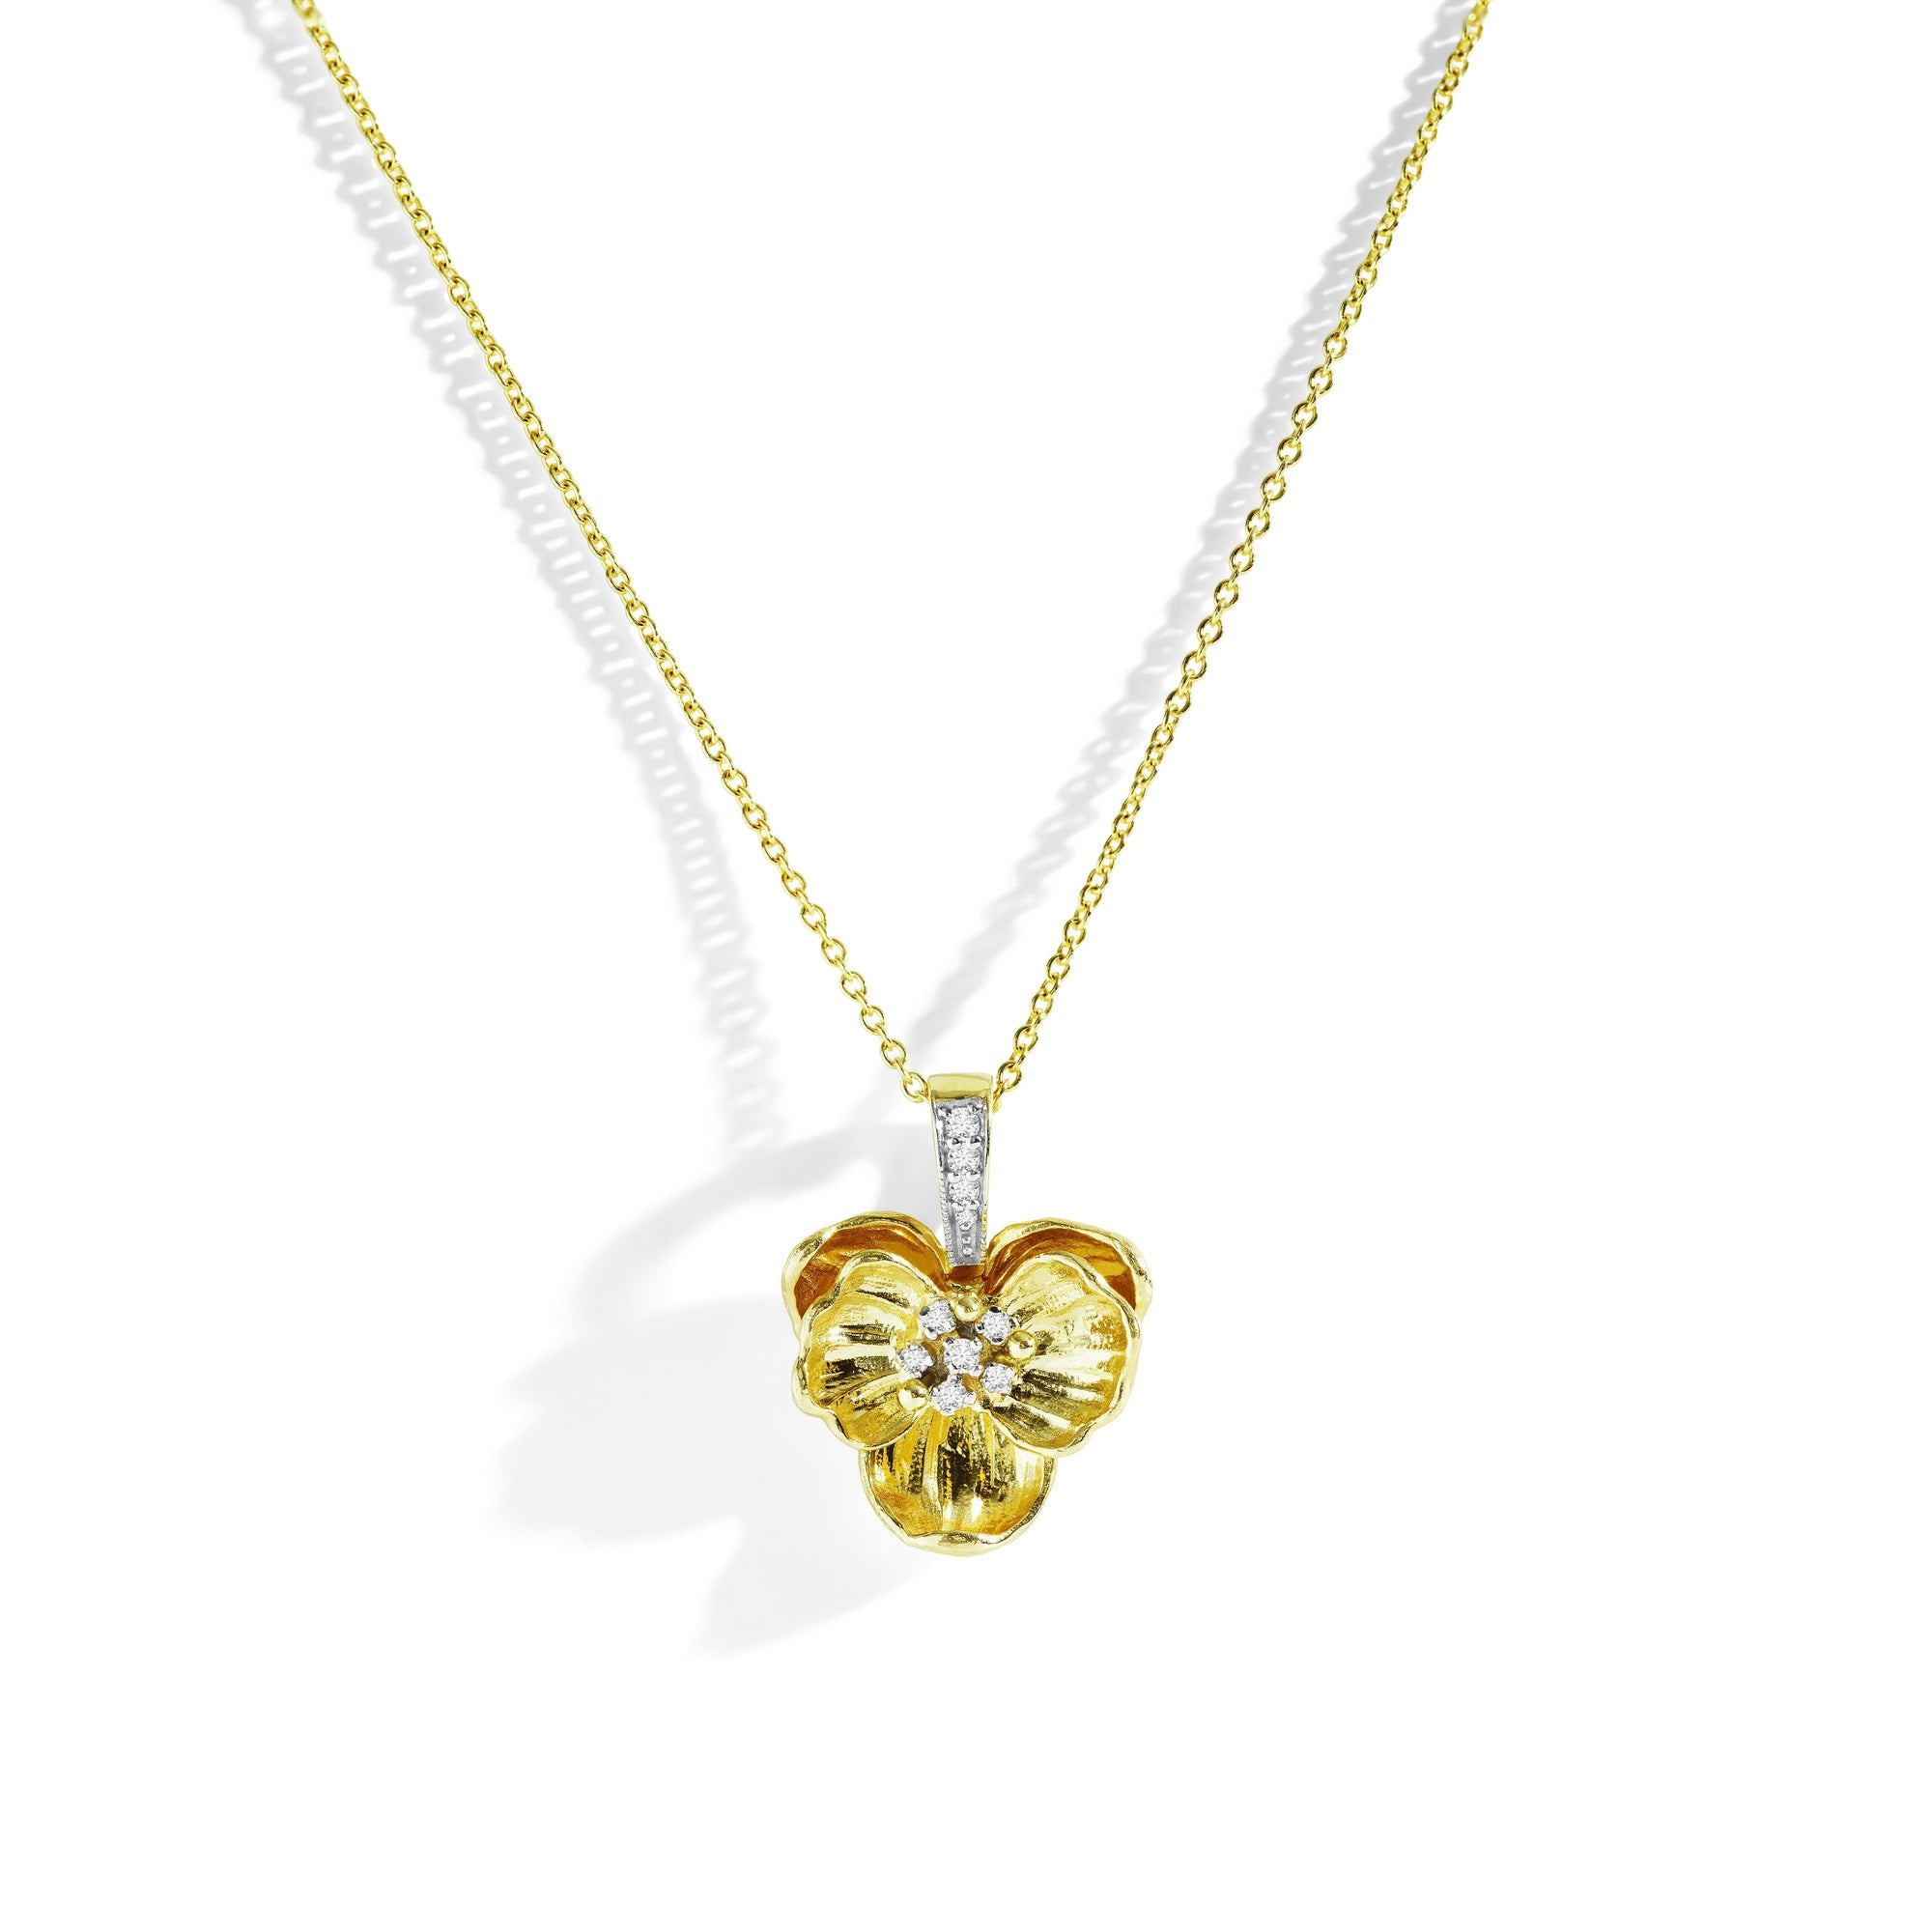 Michael Aram Orchid 15mm Necklace with Diamonds